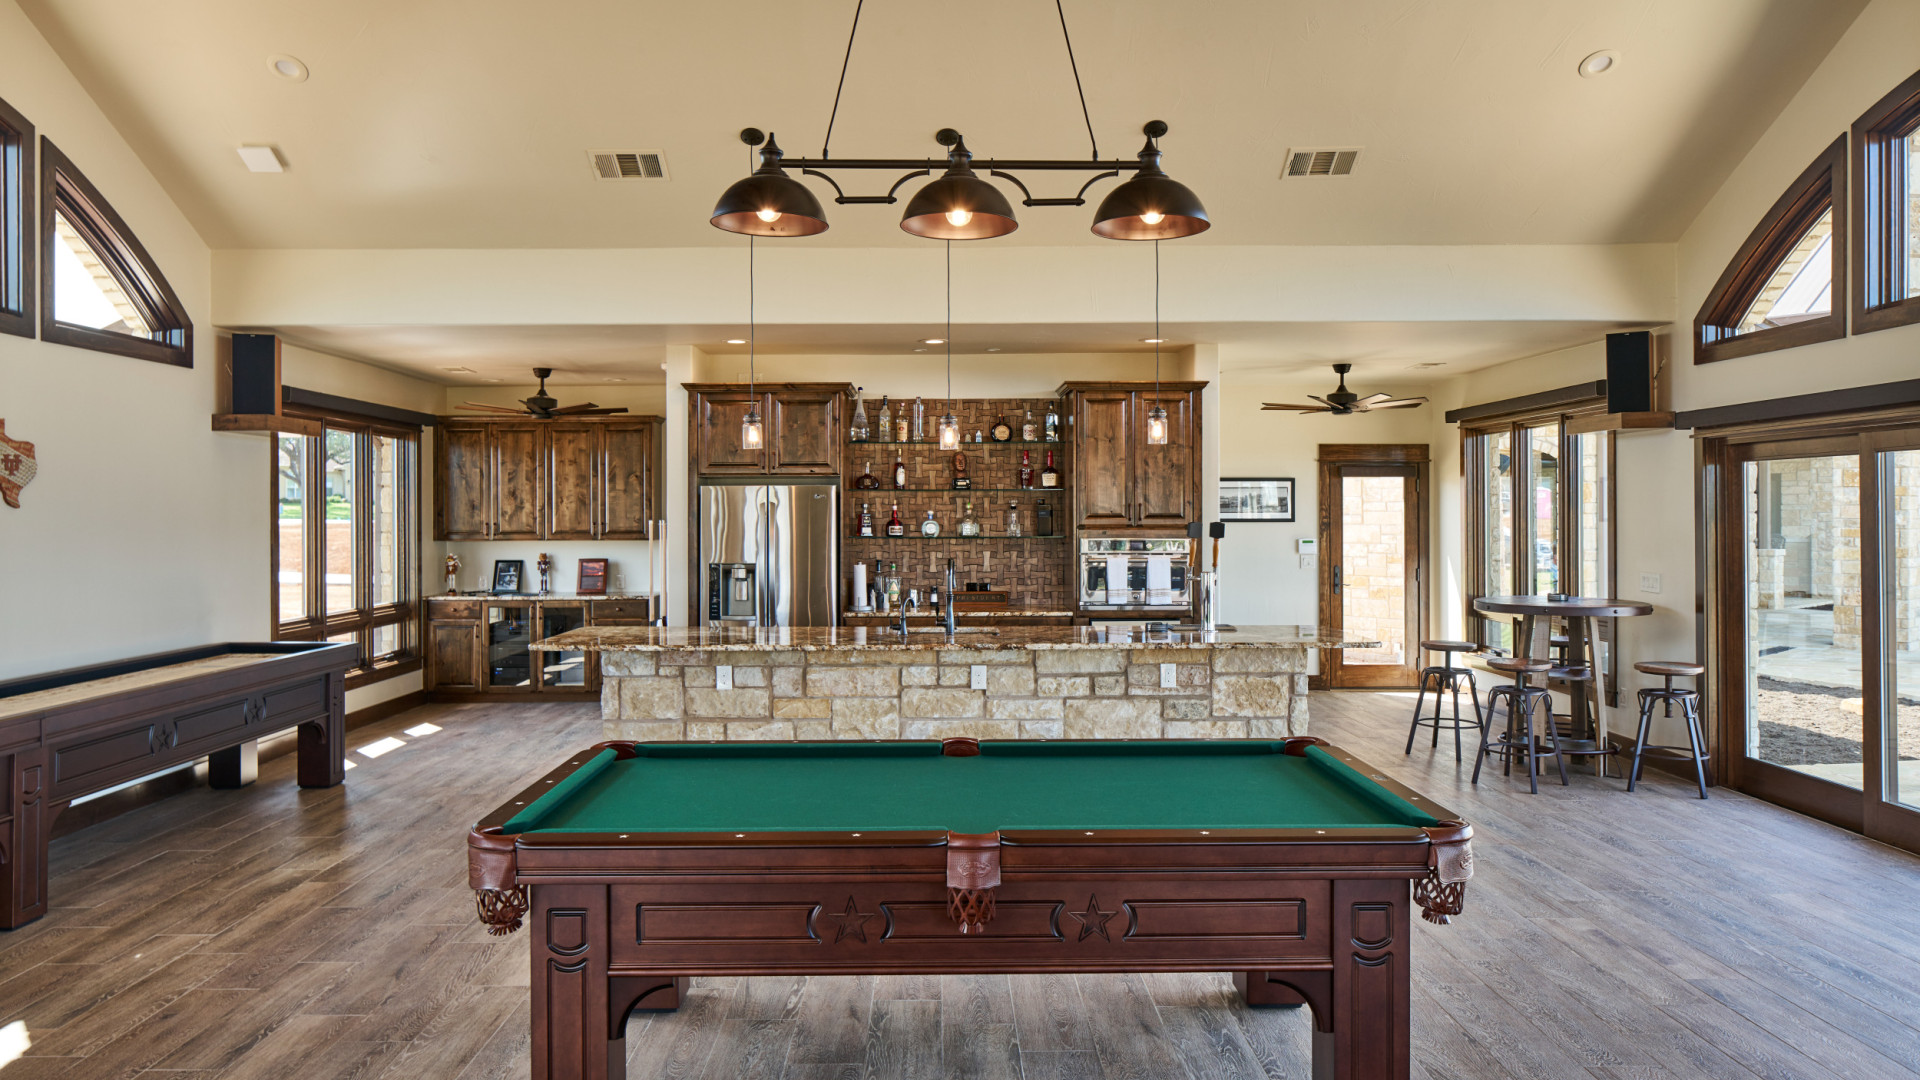 Lakeside luxury home built for entertainment, boasting an amazing game room and bar, Lake LBJ TX